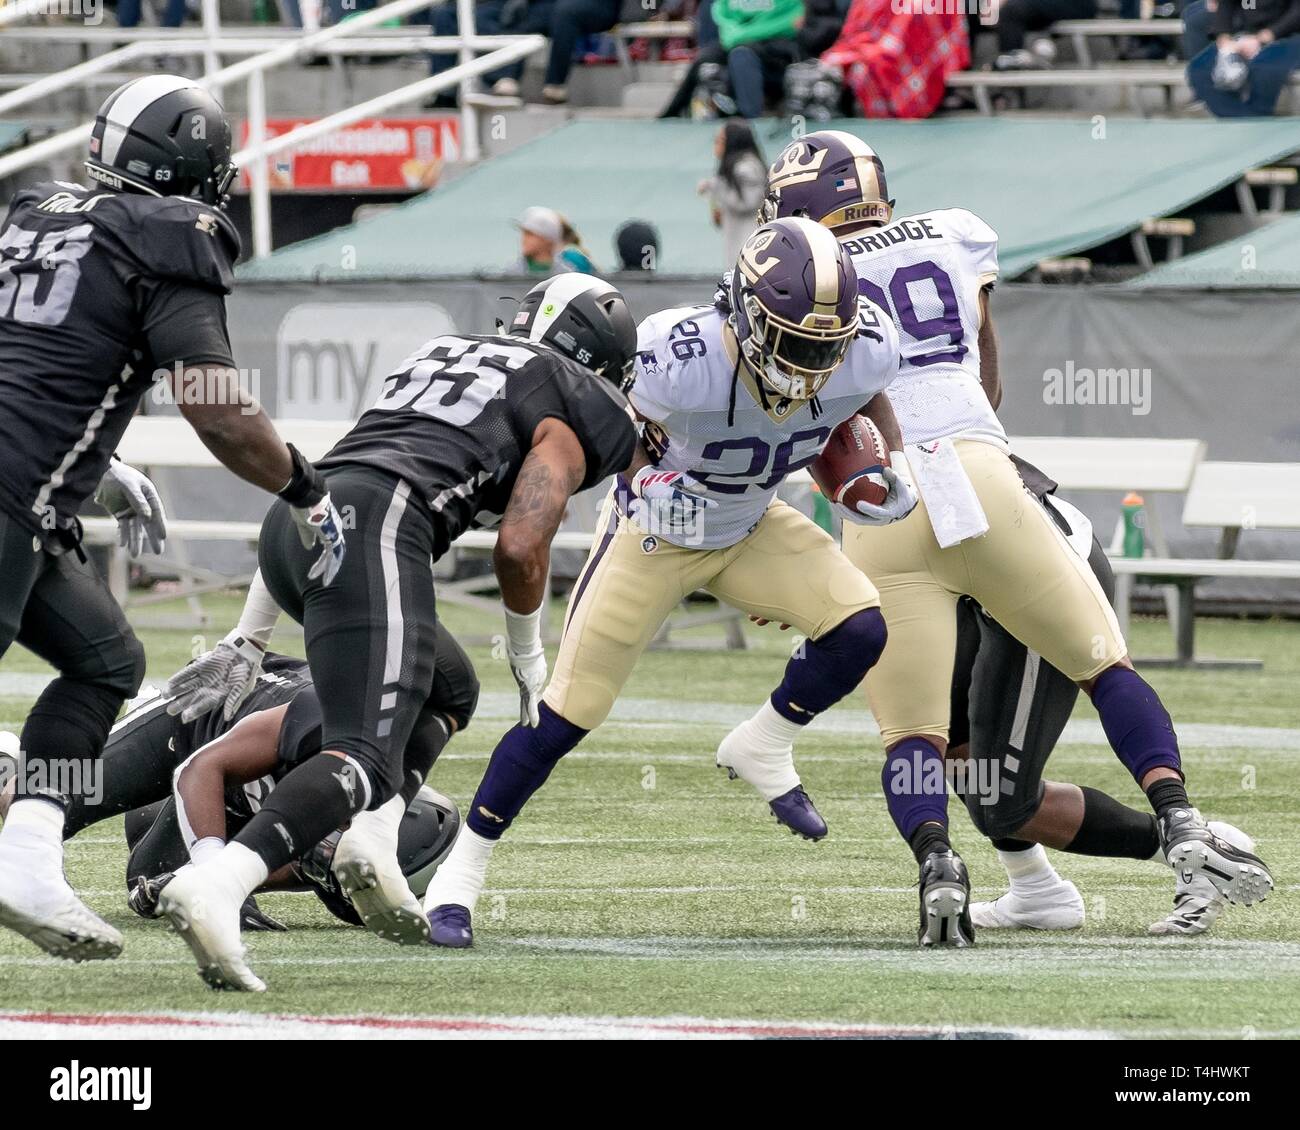 Birmingham, Alabama, USA. 31st Mar, 2019. The Birmingham Iron and the Atlanta Legends faced off in what was ultimately the last game for the two teams as the league dissolved just two days later. The Iron's home field is Legion Field, where the University of Alabama at Birmingham (UAB) plays. RB TEREAN FOLSTON (26) runs the ball during the game. Credit: Jeremy Raines/ZUMA Wire/Alamy Live News Stock Photo